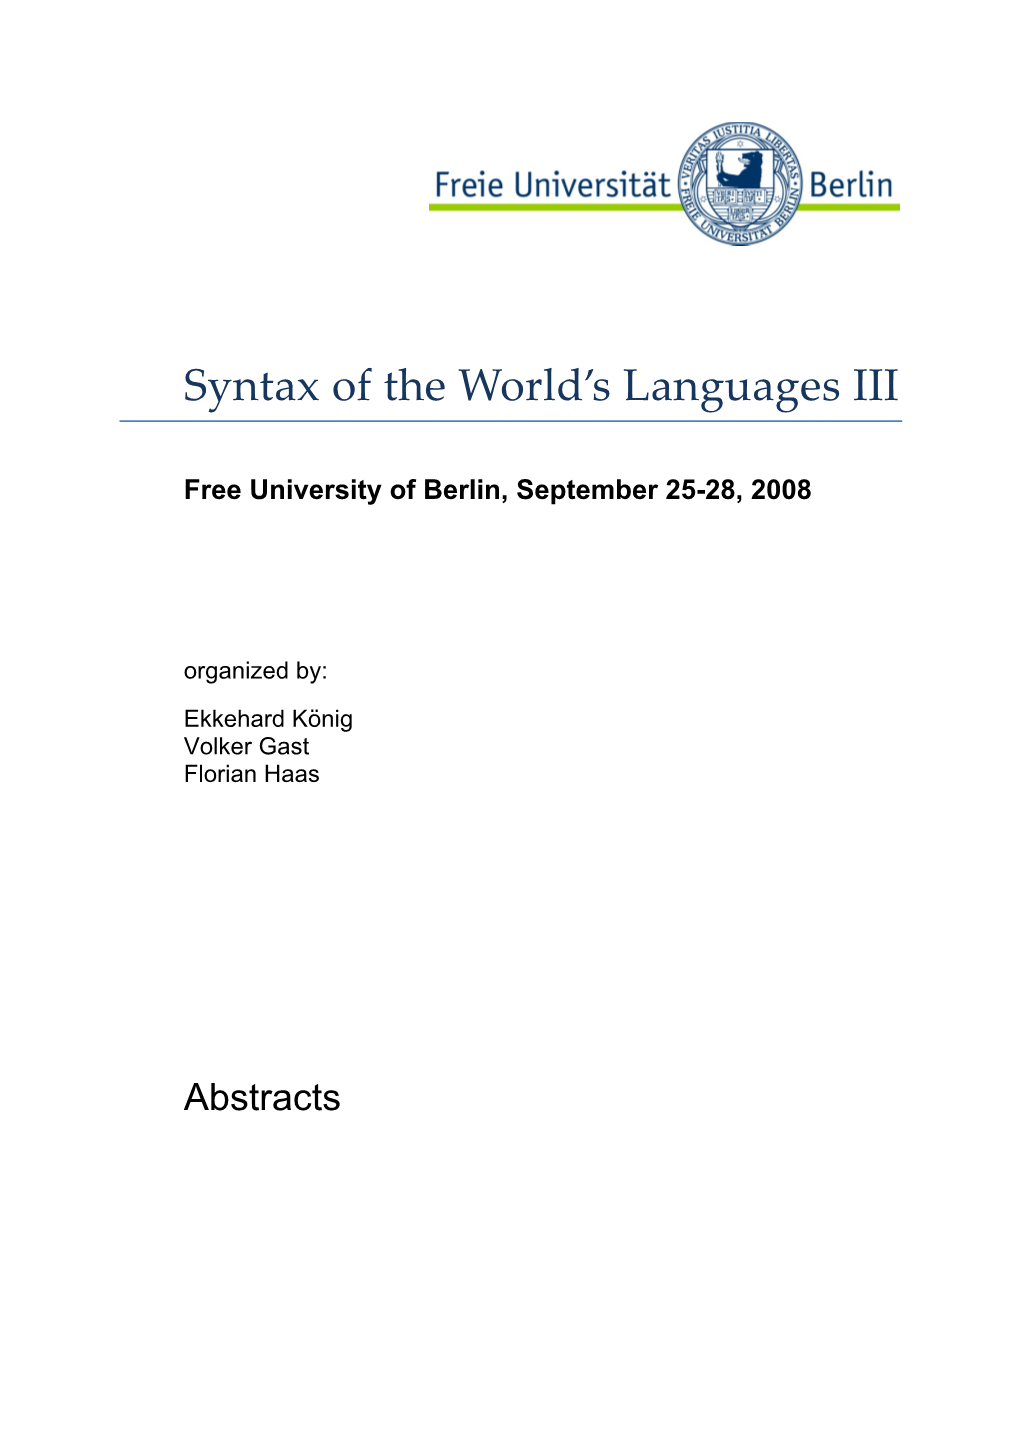 Syntax of the World's Languages III Berlin, September 25-28, 2008